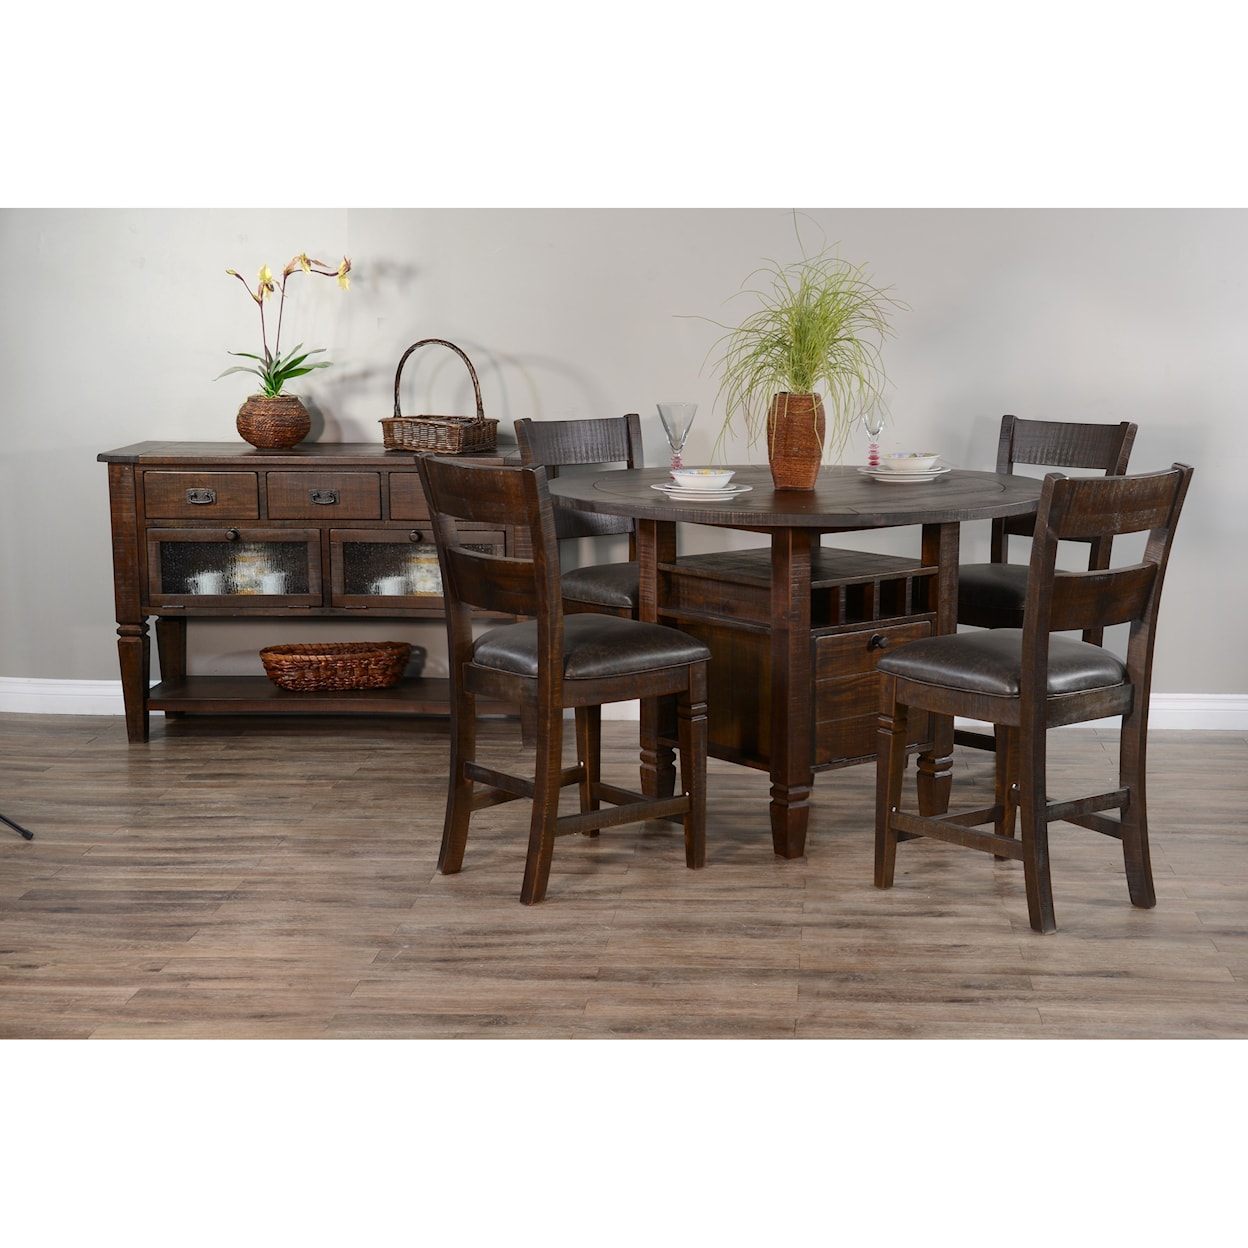 Sunny Designs Homestead Dining Room Group